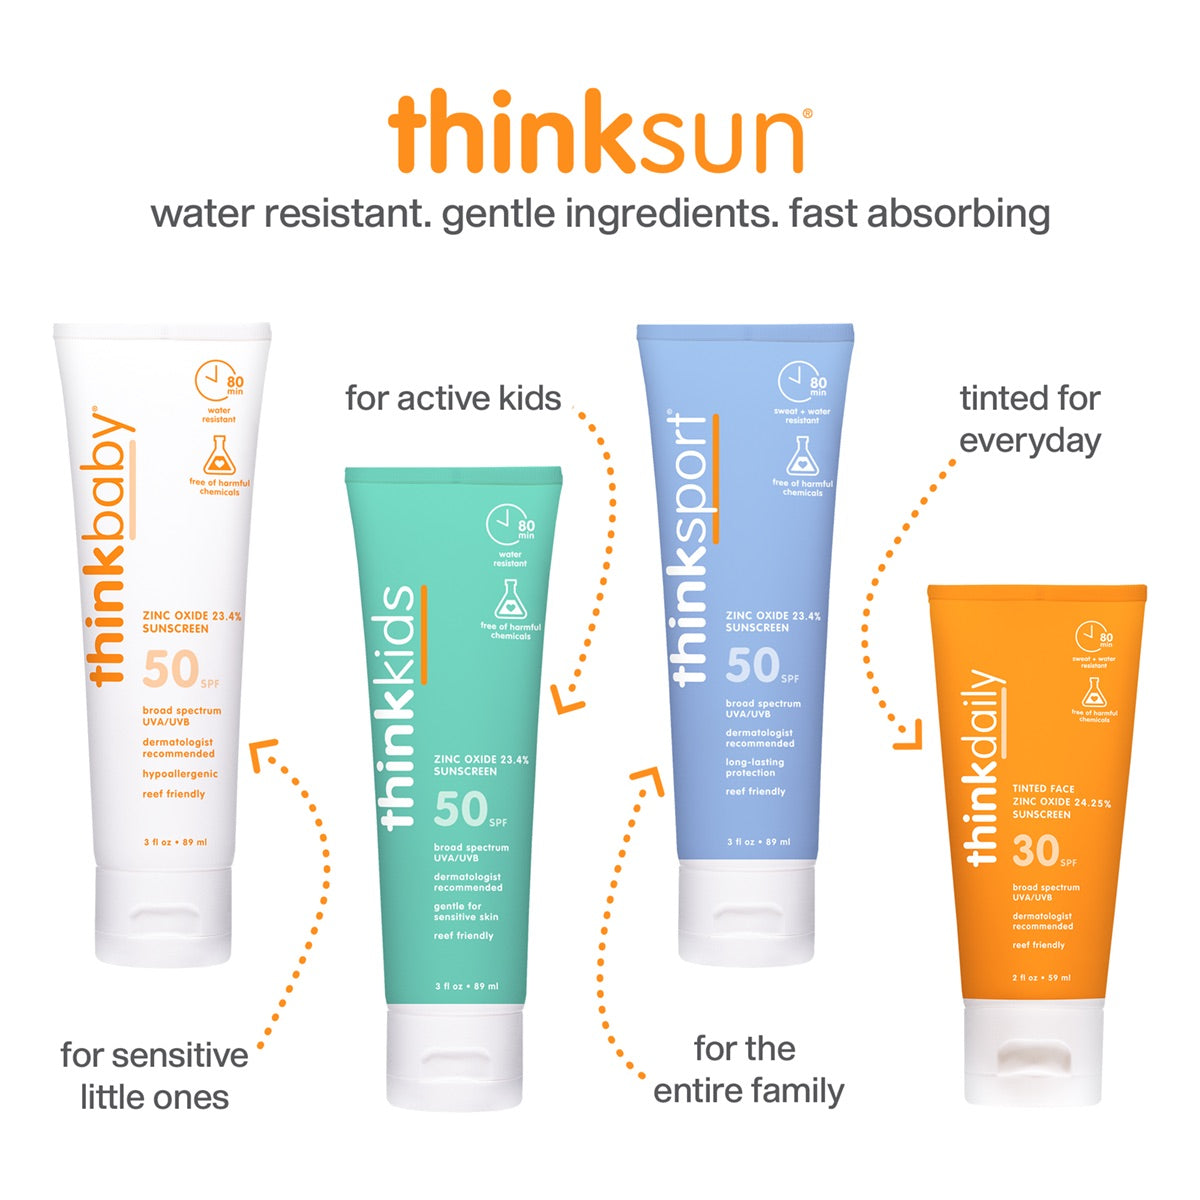 A range Thinksun suncare products displayed against a white background, highlighting water resistance and gentle formula suitable for family, kids, and daily use.